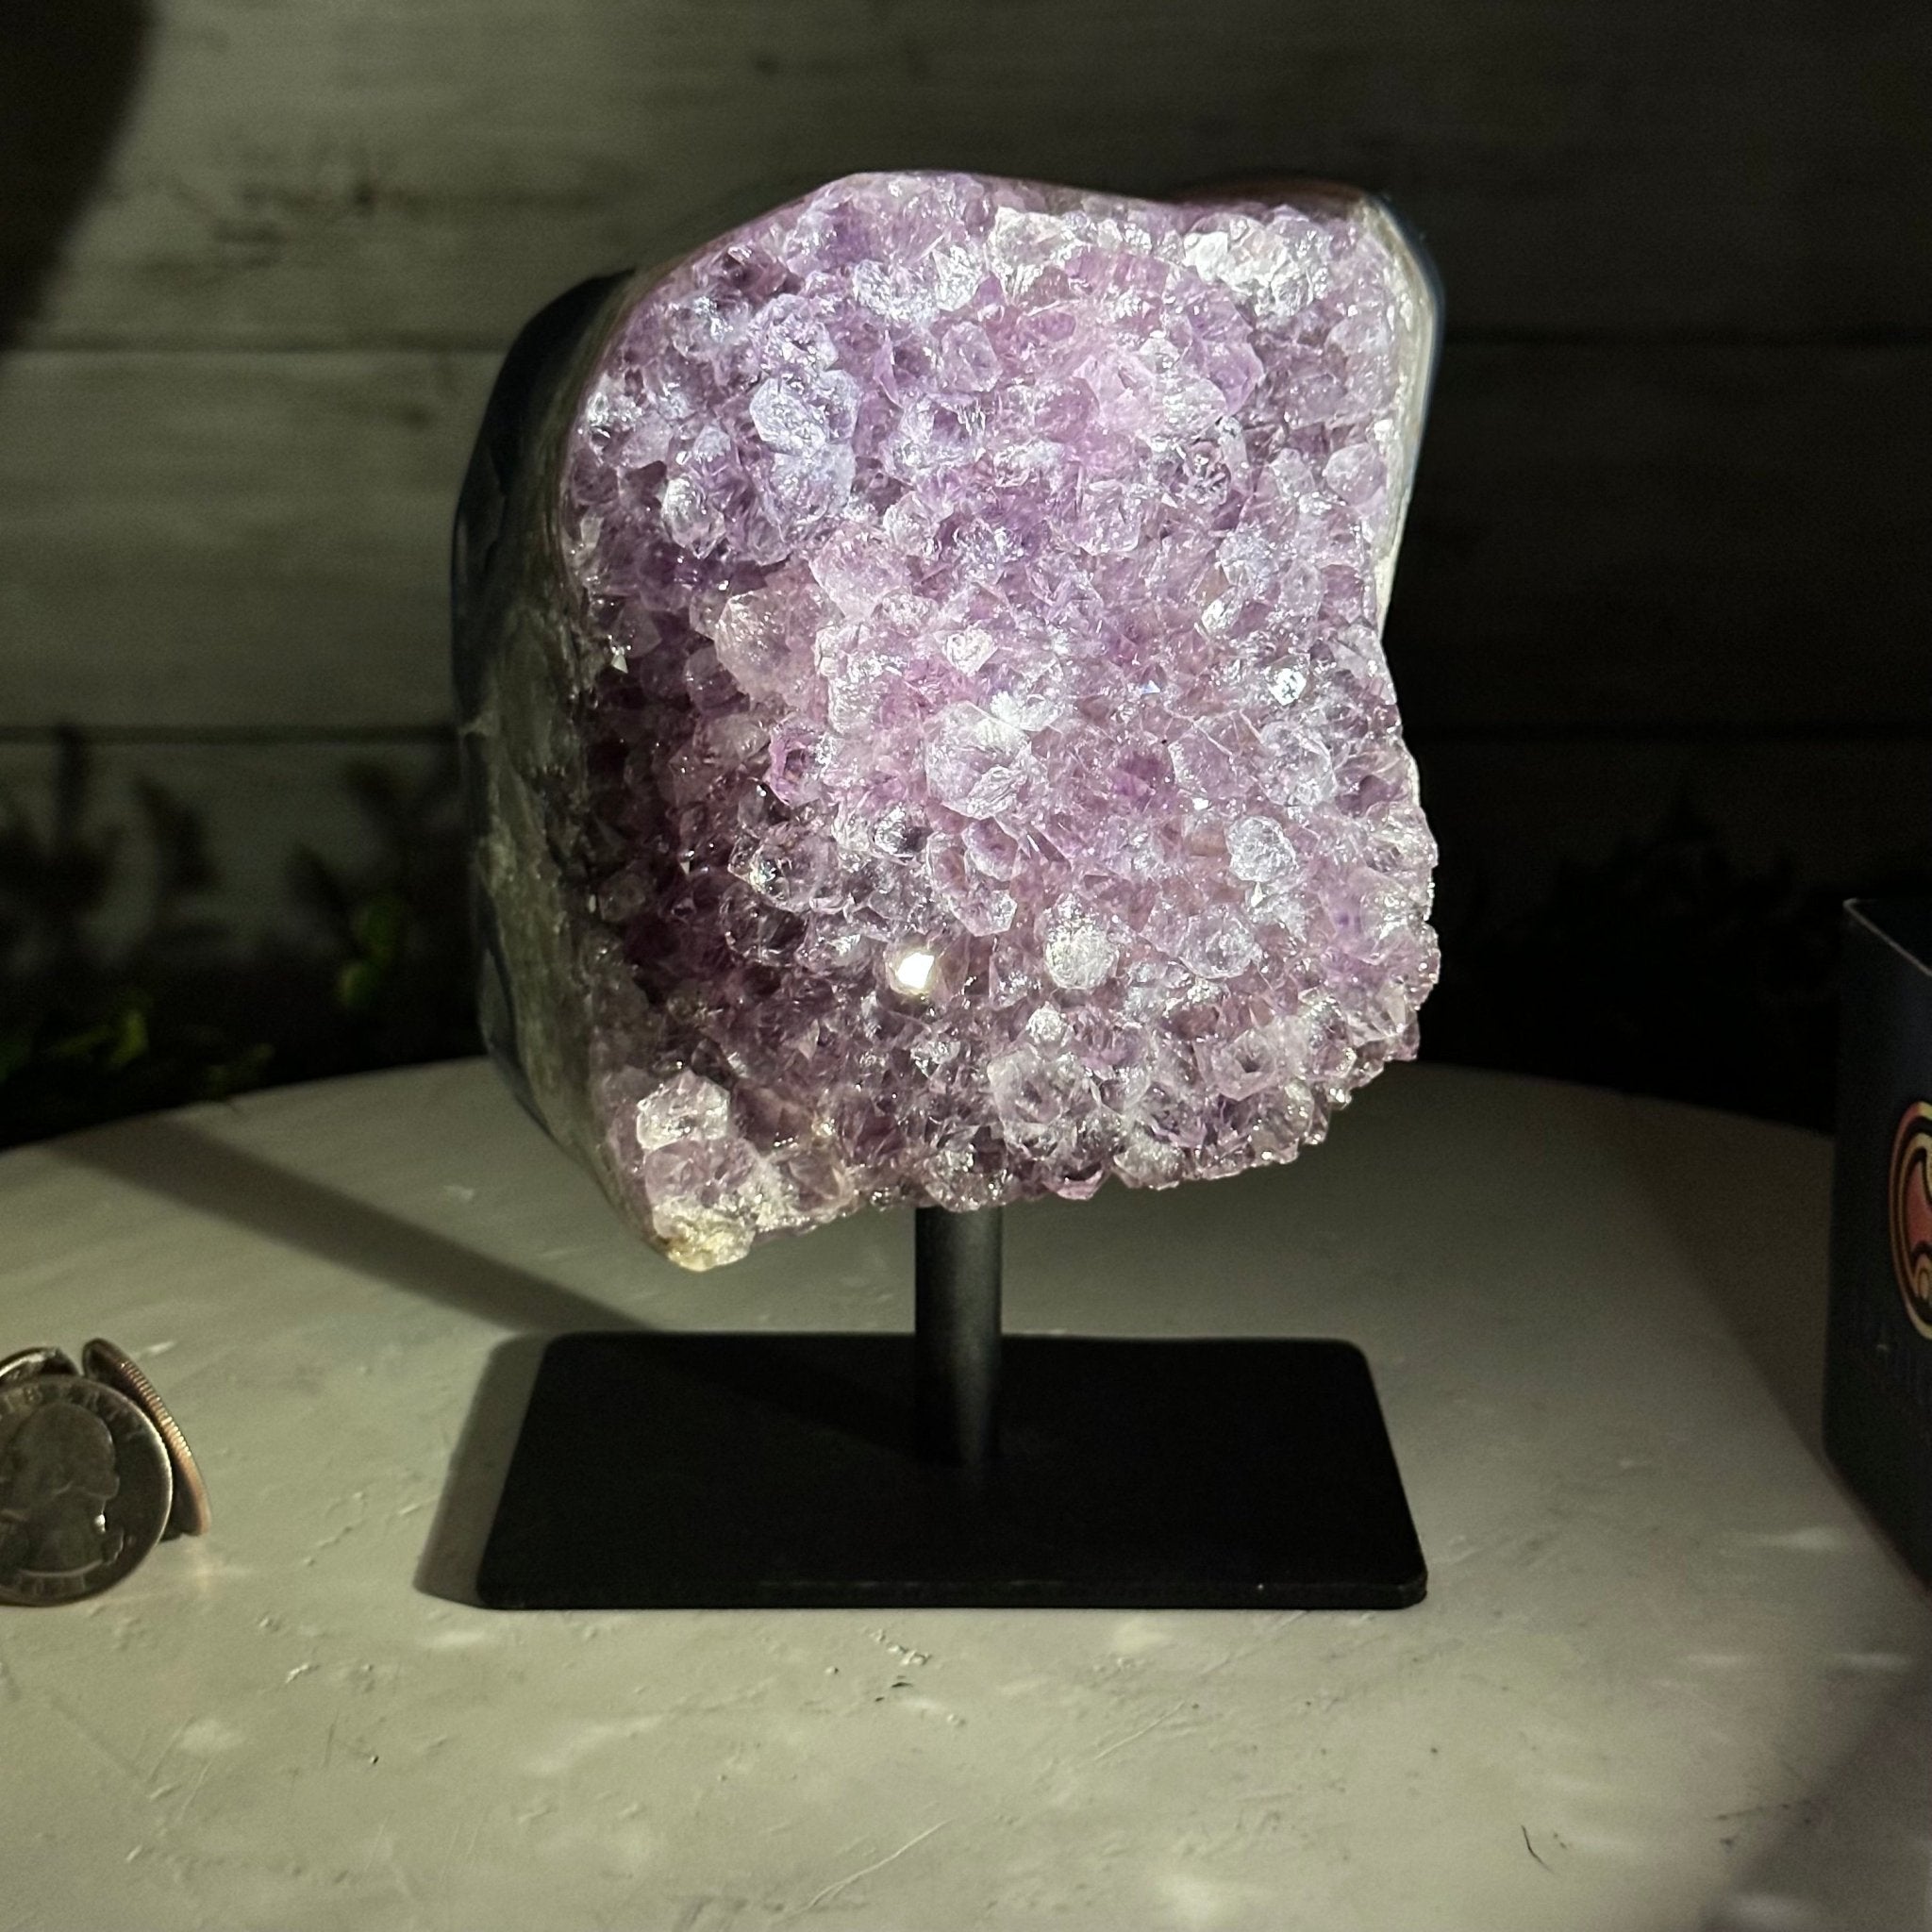 Extra Quality Amethyst Cluster on a Metal Base, 3.3 lbs & 5.7" Tall #5491-0130 - Brazil GemsBrazil GemsExtra Quality Amethyst Cluster on a Metal Base, 3.3 lbs & 5.7" Tall #5491-0130Clusters on Fixed Bases5491-0130